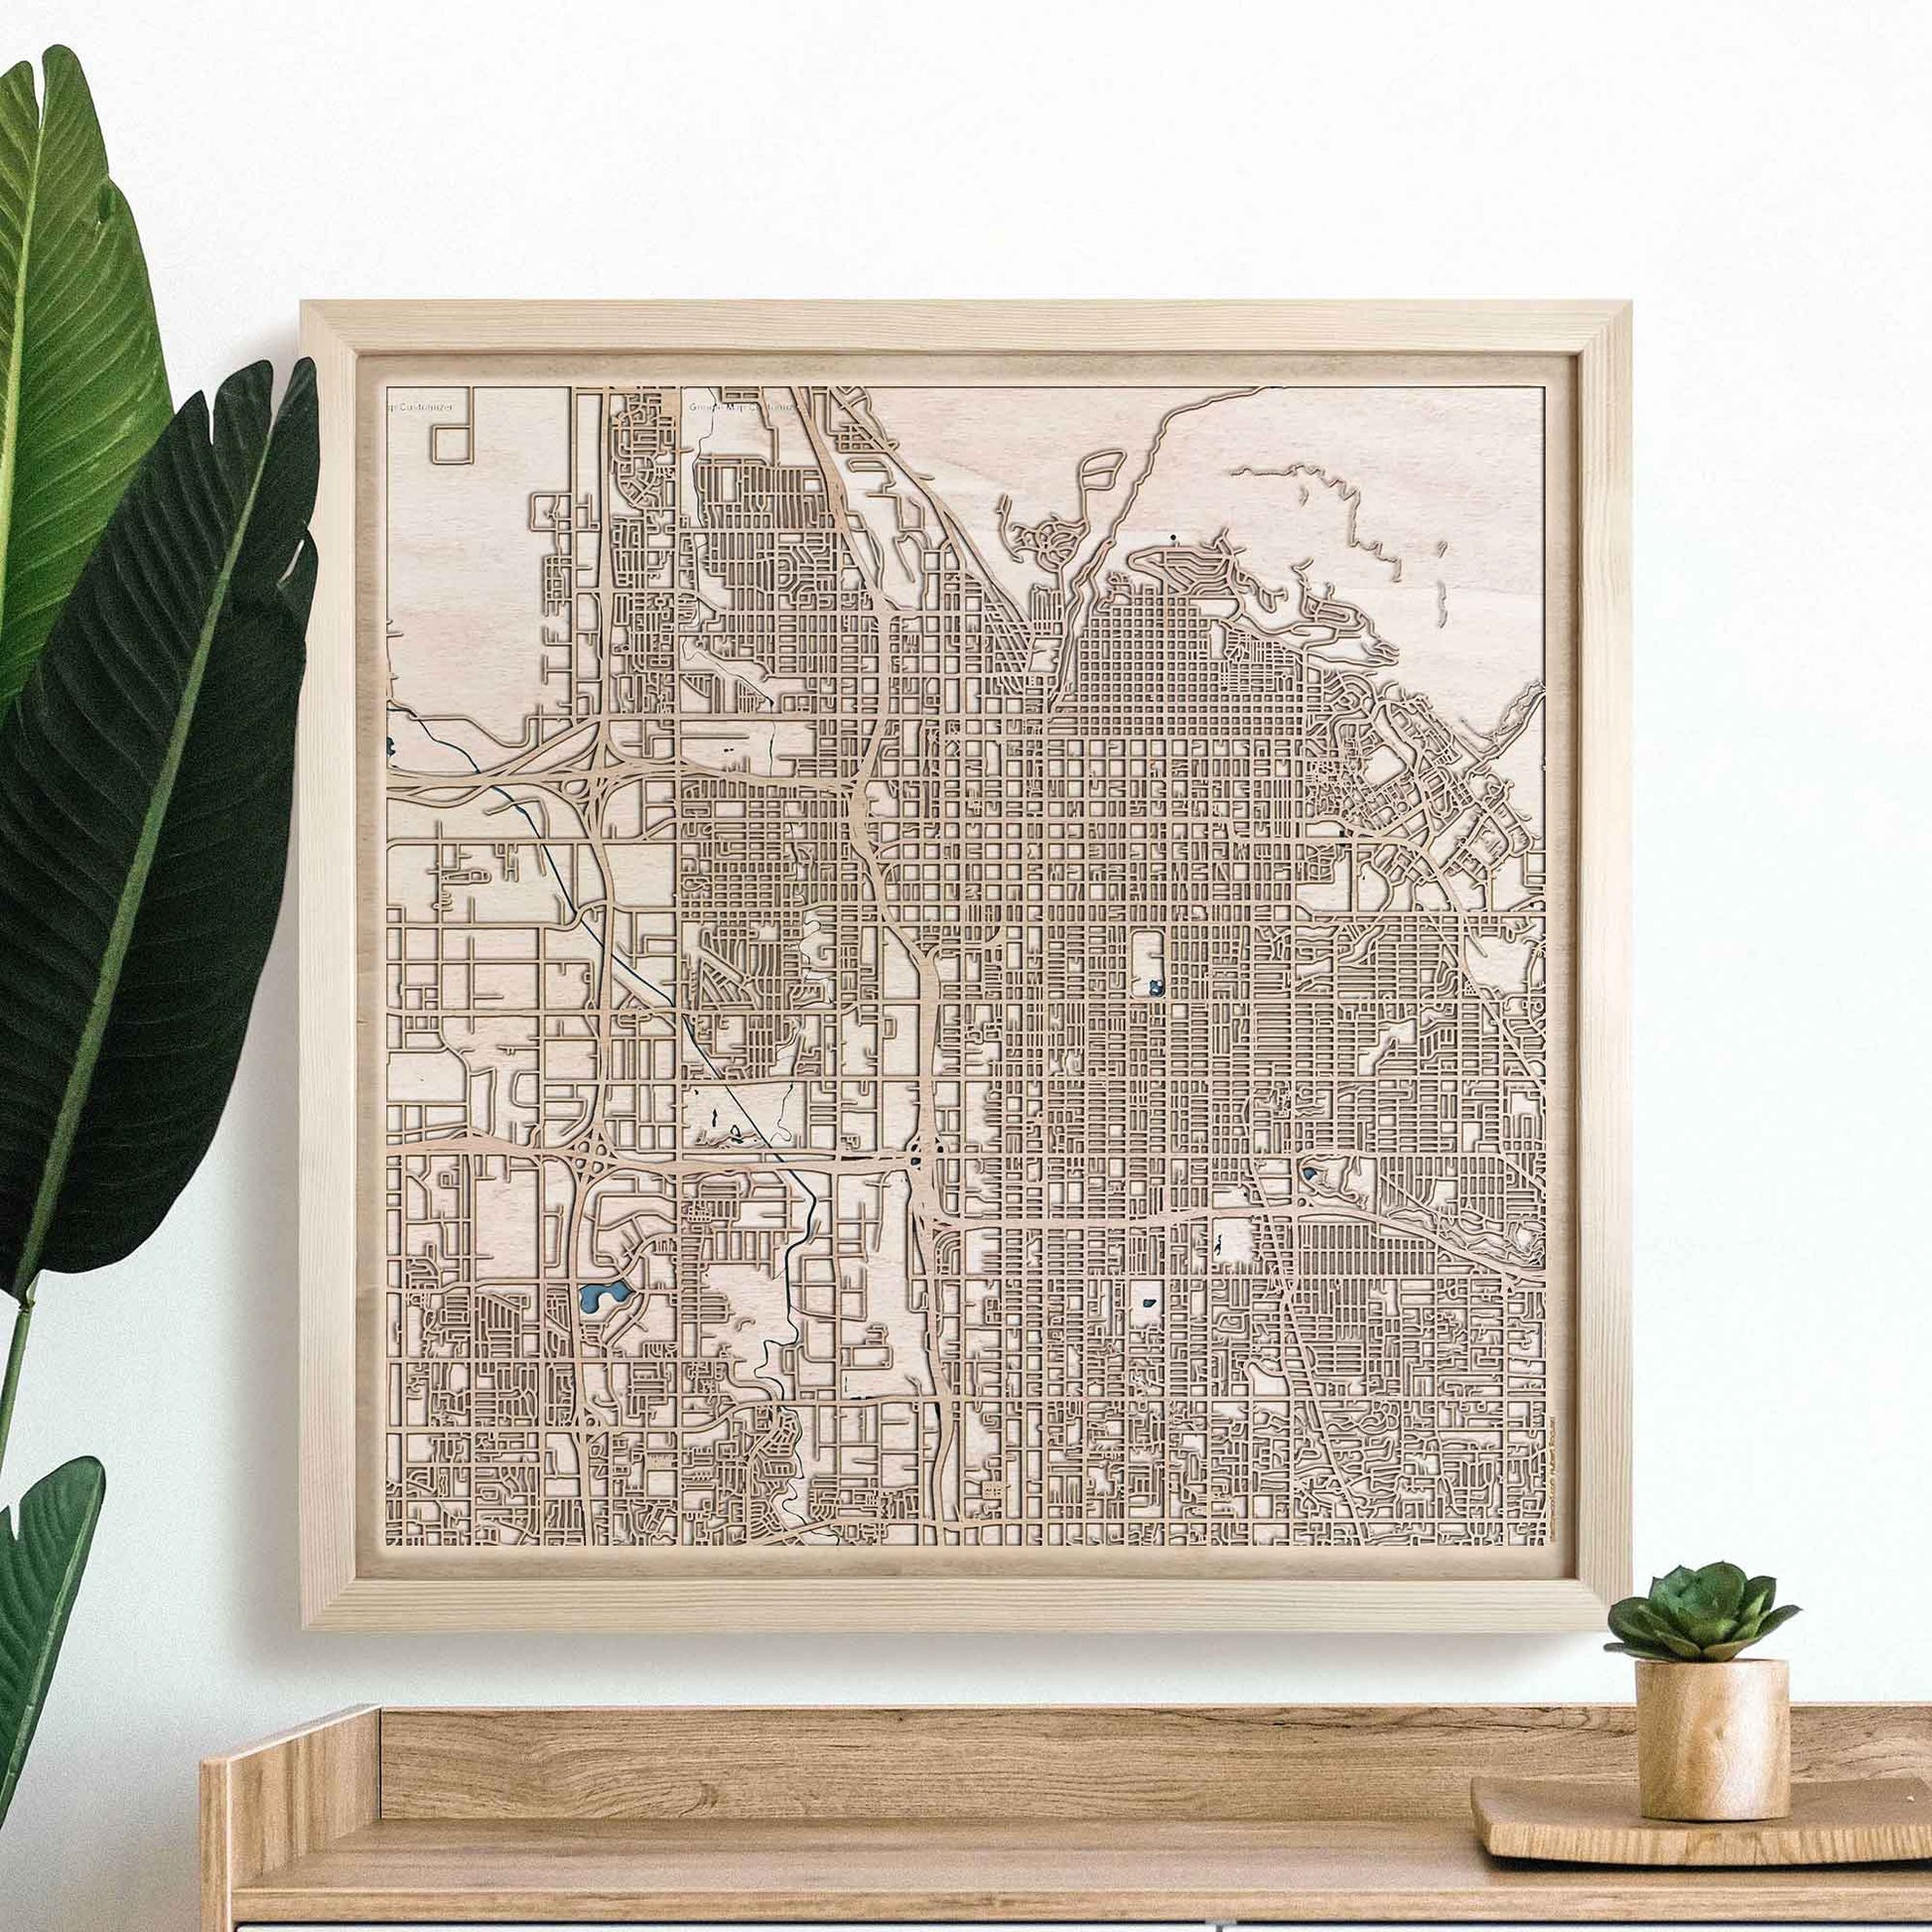 Salt Lake City Wooden Map by CityWood - Custom Wood Map Art - Unique Laser Cut Engraved - Anniversary Gift